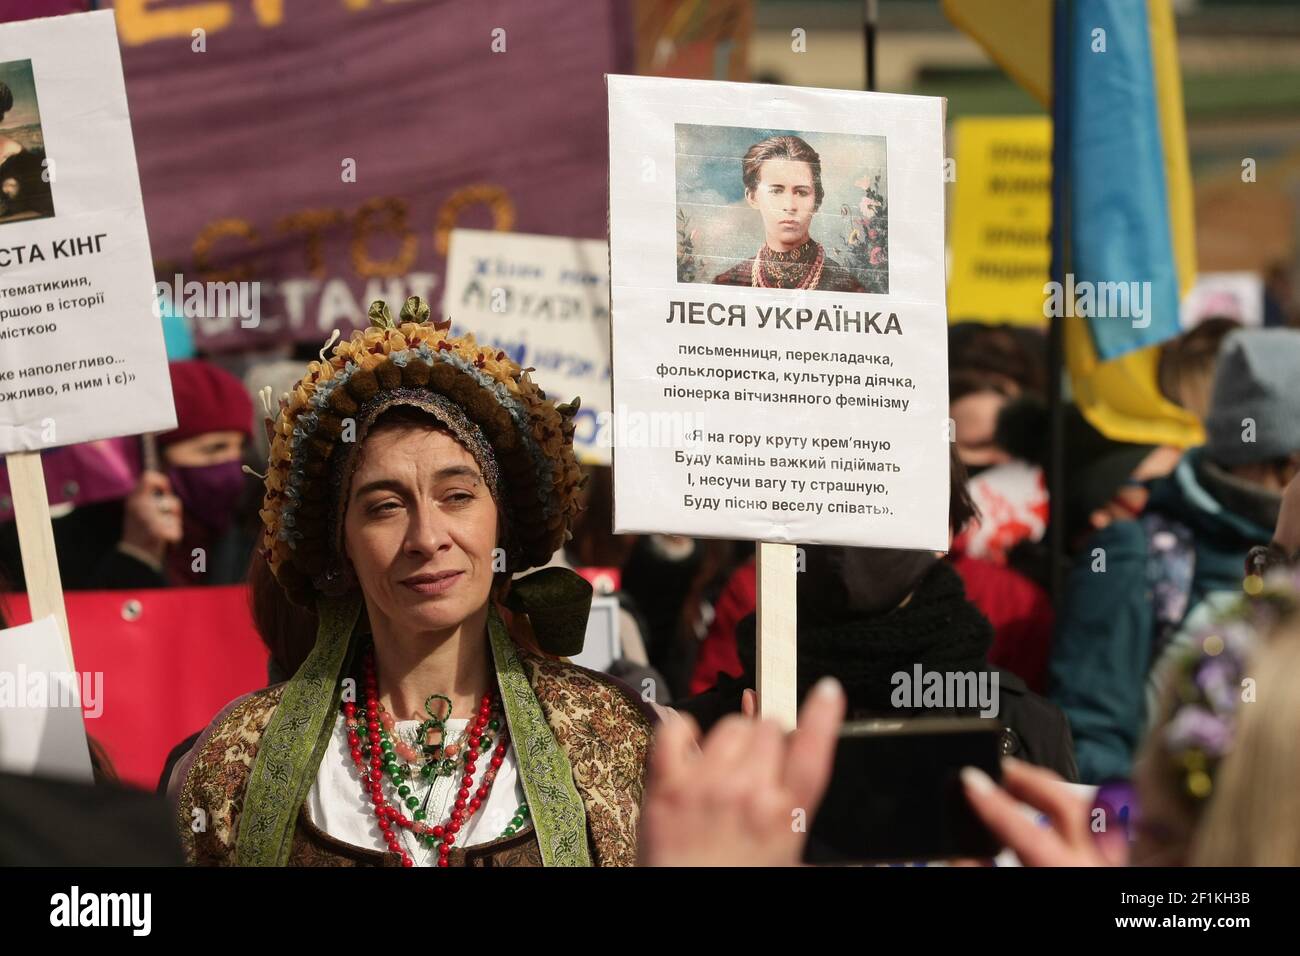 KYIV, UKRAINE - MARCH 8, 2021 - A woman in a period costume holds a placard featuring Ukrainian writer Lesya Ukrainka as participants gather for the M Stock Photo